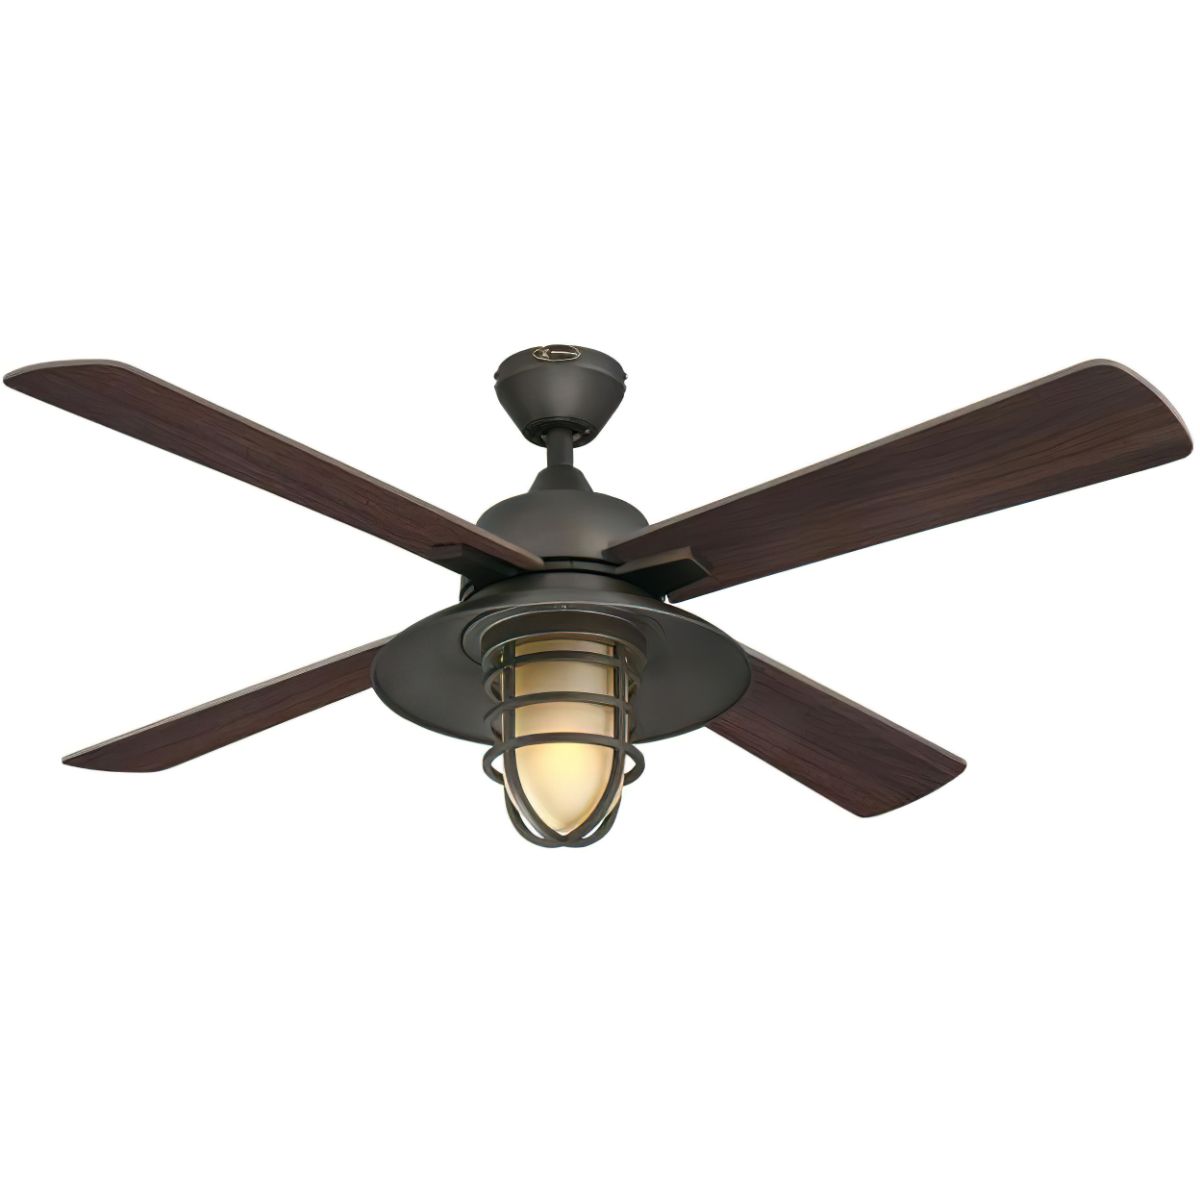 Porto 52 Inch Rustic Caged Smart Ceiling Fan With Light And Remote, Black/Bronze Finish